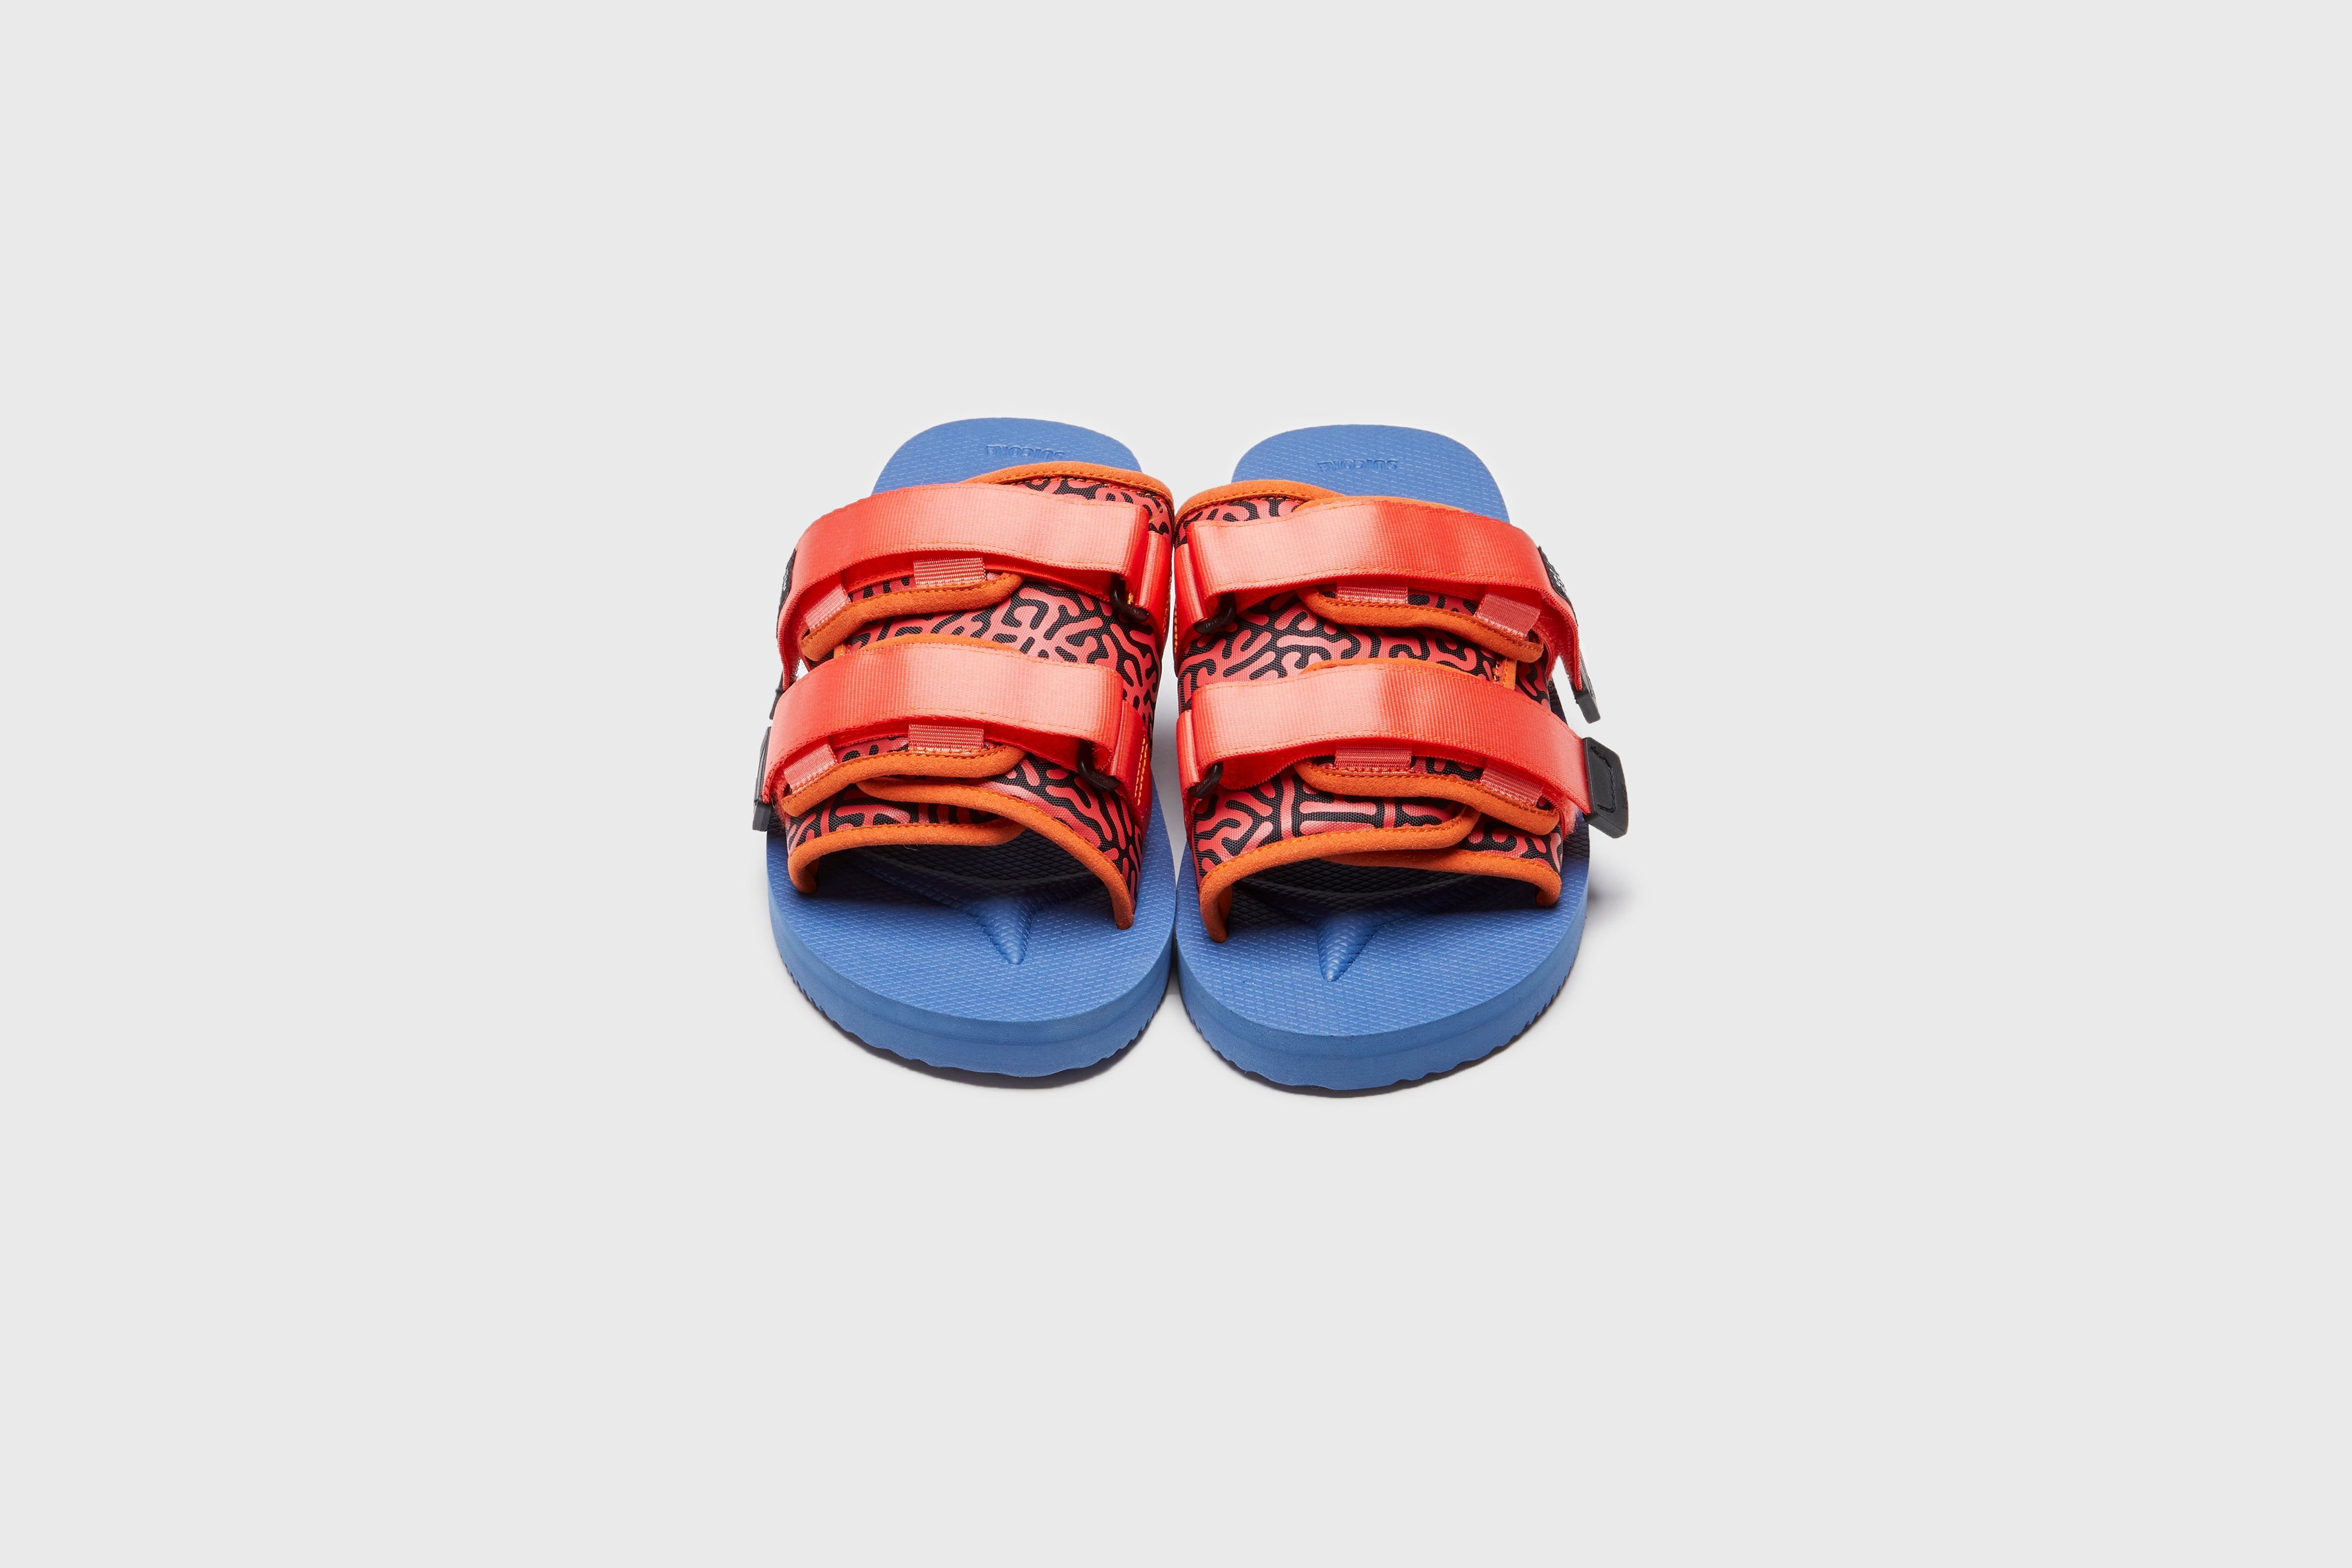 SUICOKE MOTO-Cab-PT06 slides with orange &amp; navy nylon upper, orange &amp; navy midsole and sole, strap and logo patch. From Spring/Summer 2023 collection on eightywingold Web Store, an official partner of SUICOKE. OG-056CAB-PT06 ORANGE X NAVY